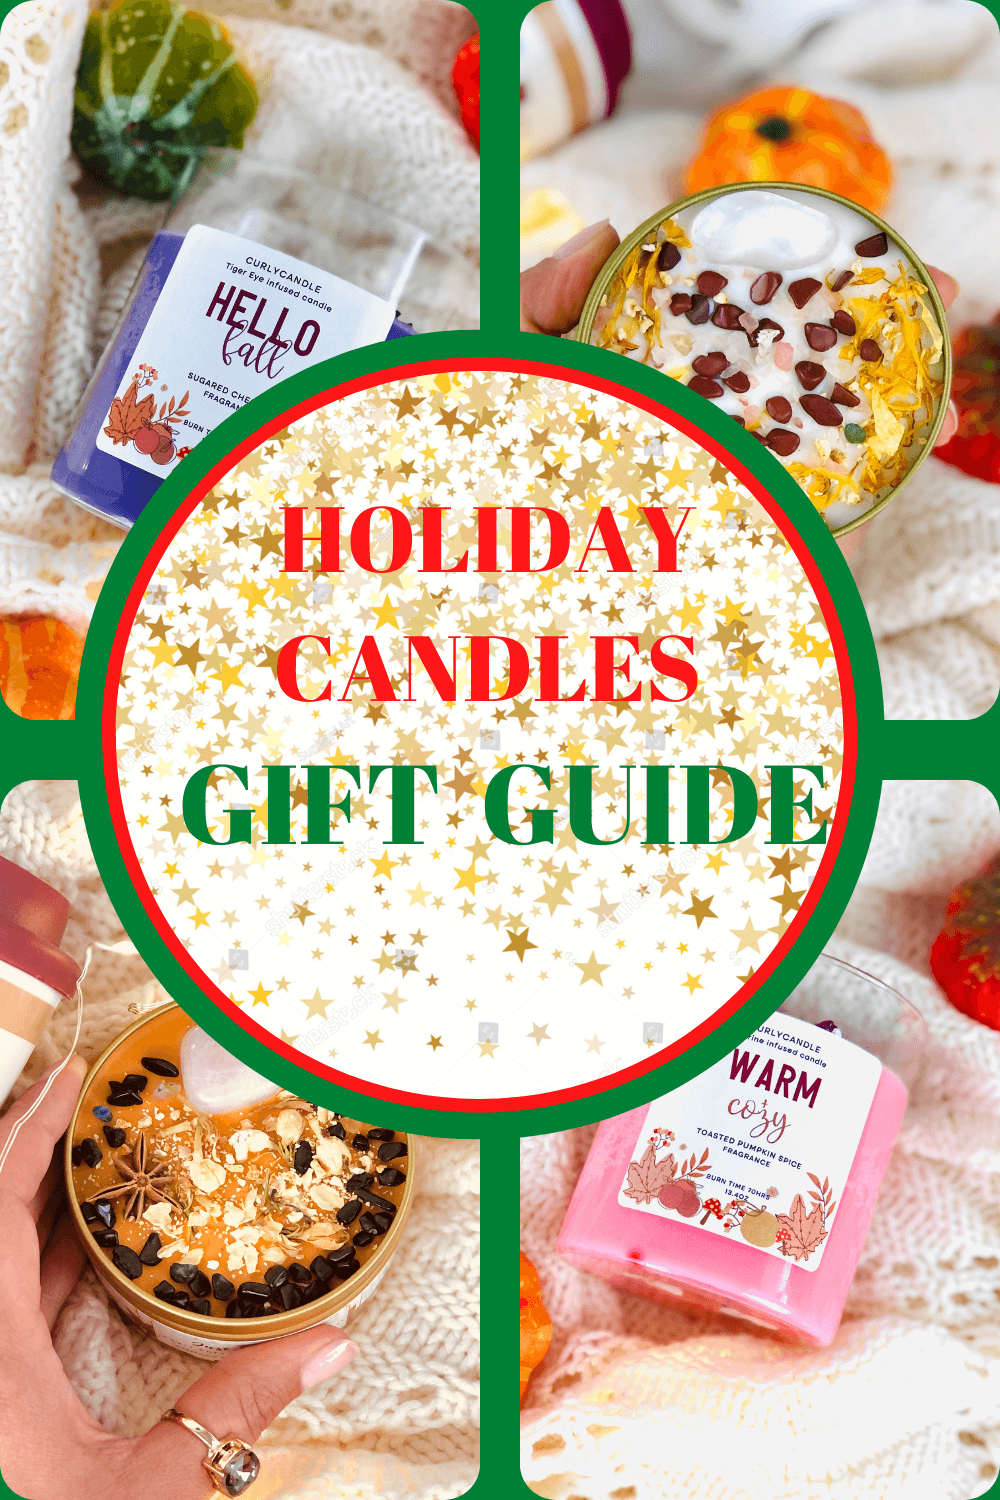 Holiday Candle gift guide